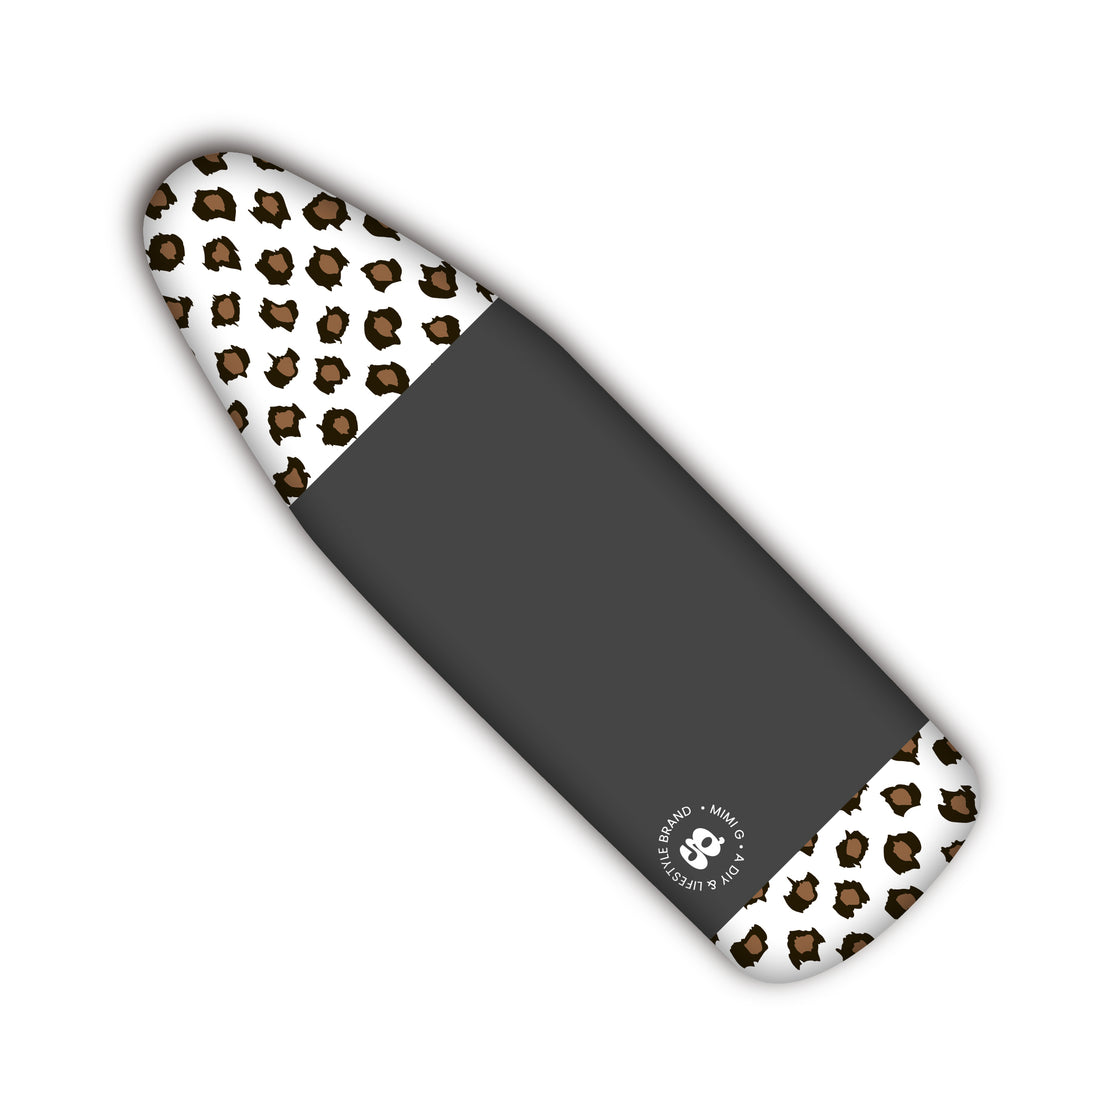 Mimi G Oliso ironing board cover. Iconic leopard skin pattern and dark grey with a Mimi G logo.